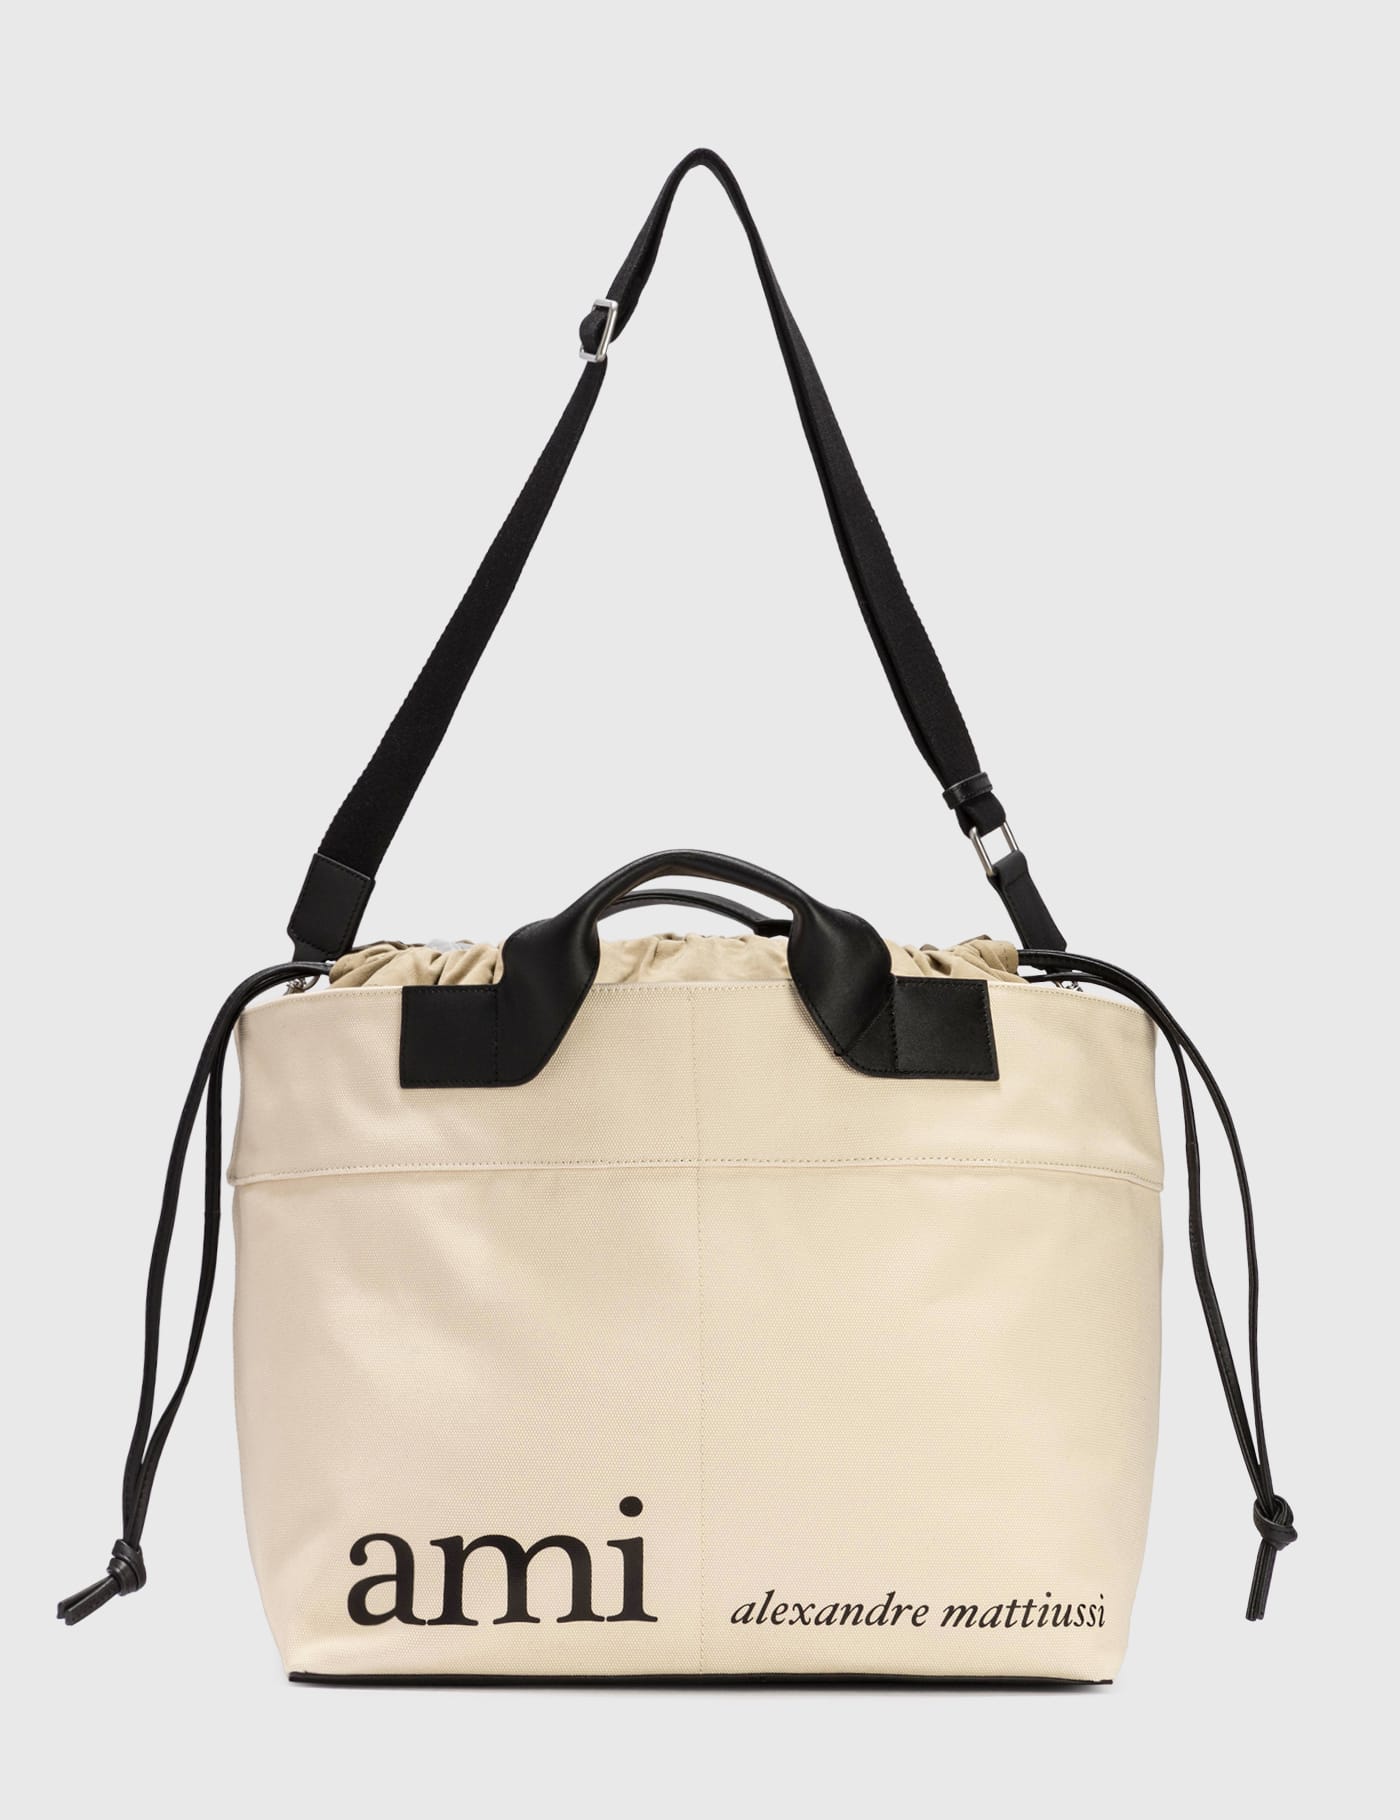 Ami - Large Market Bag | HBX - Globally Curated Fashion and 